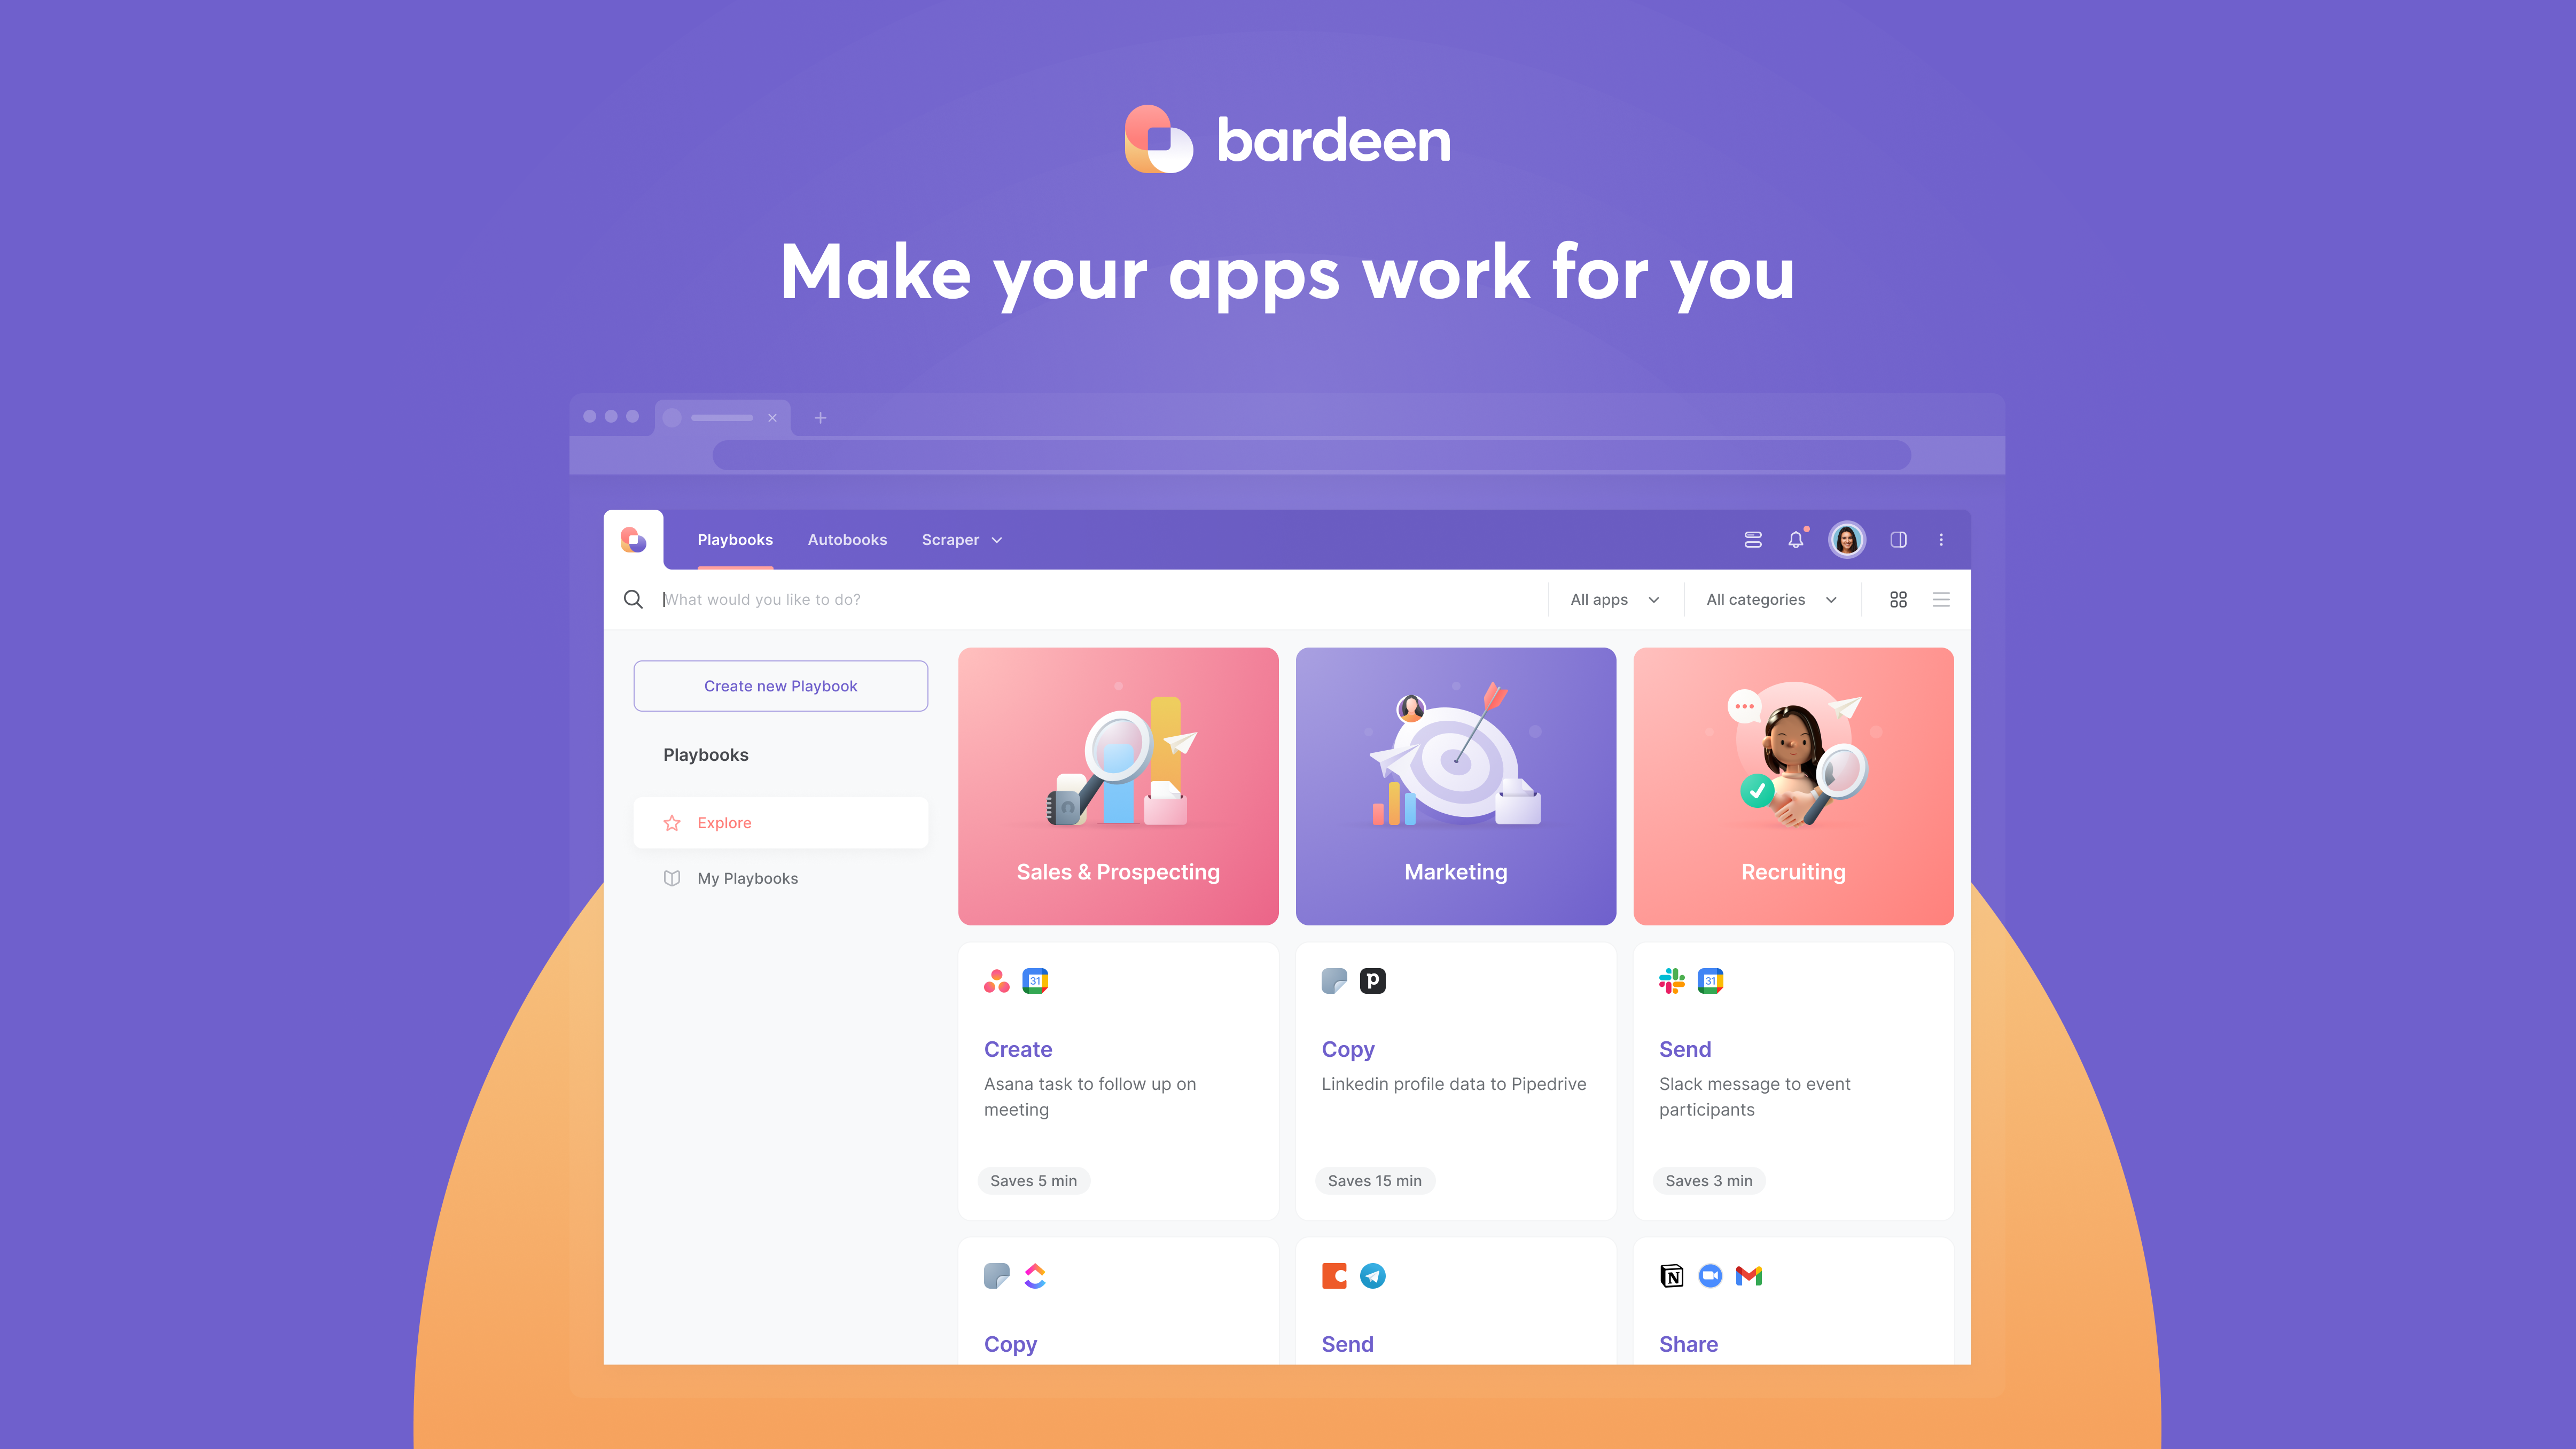 Bardeen automates your repetitive processes